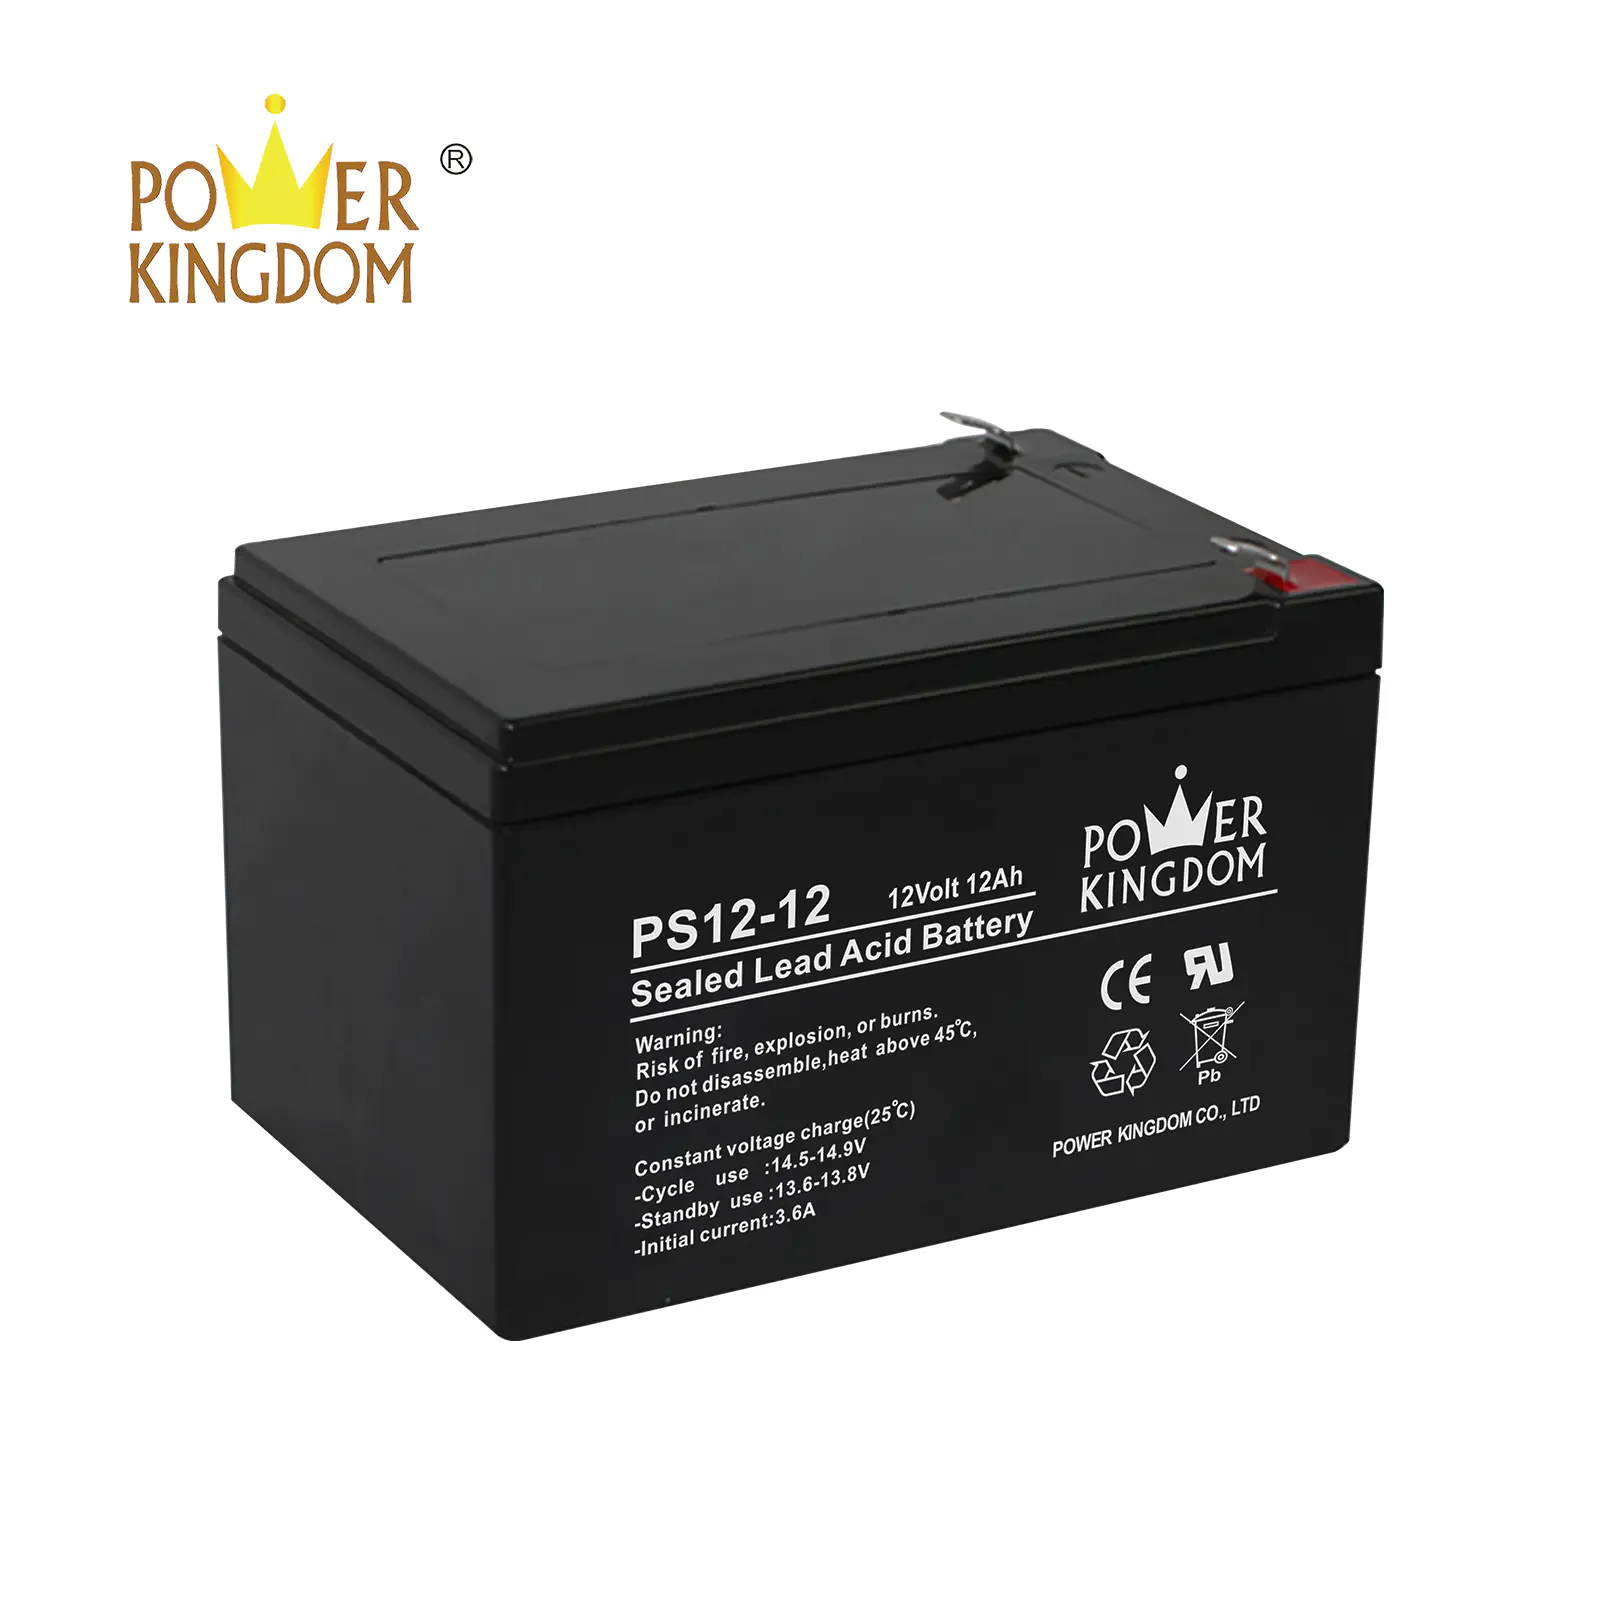 Hot sale PS12-12 lead acid battery 12v 12ah 20hr small rechargeable battery